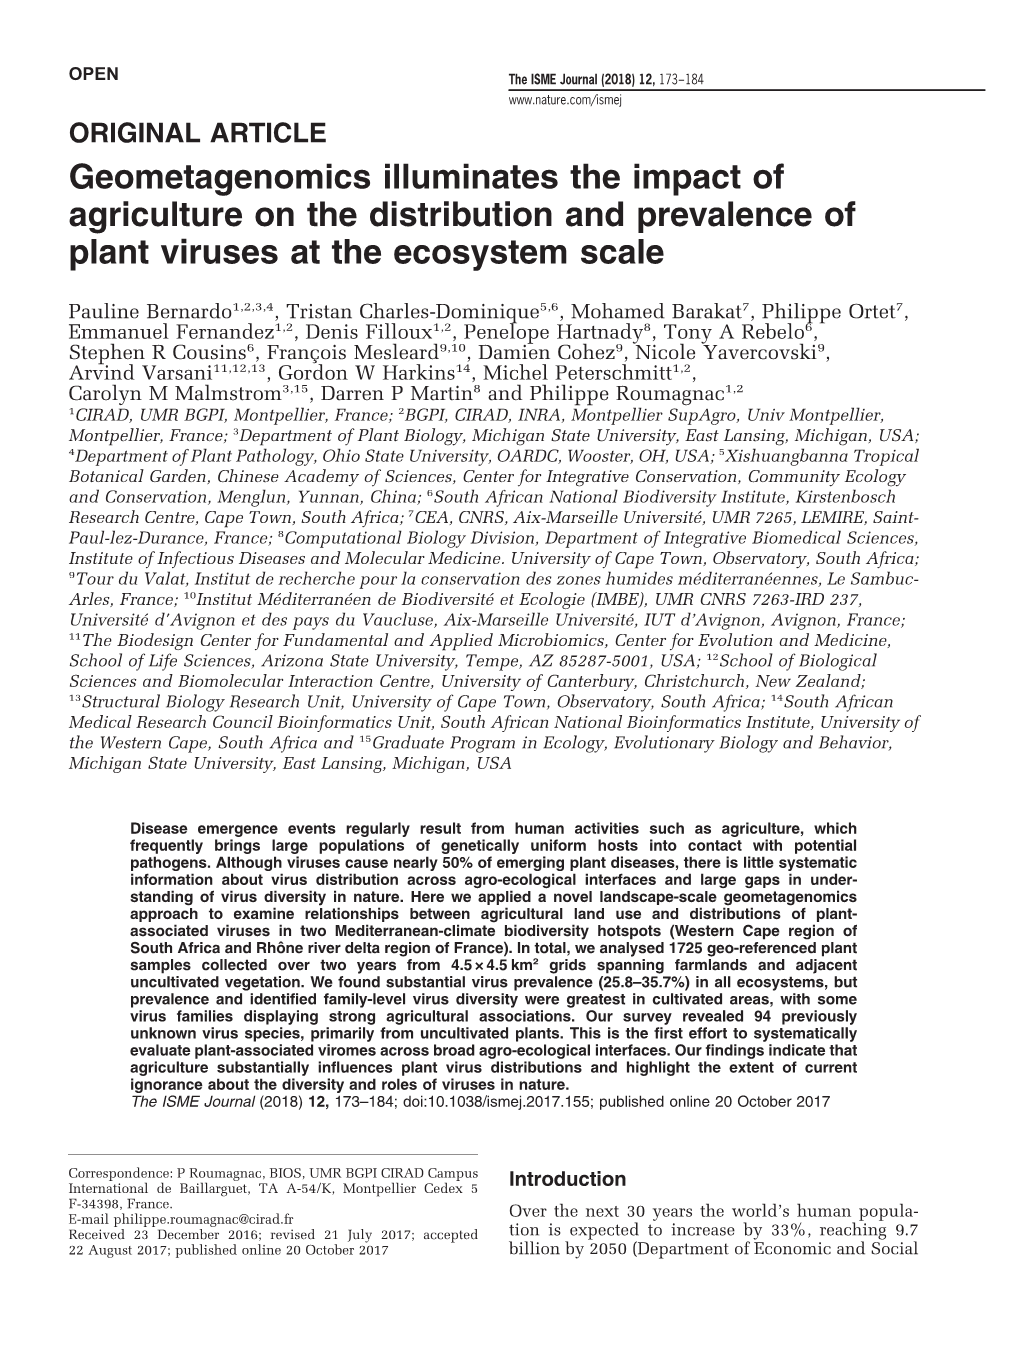 Geometagenomics Illuminates the Impact of Agriculture on the Distribution and Prevalence of Plant Viruses at the Ecosystem Scale